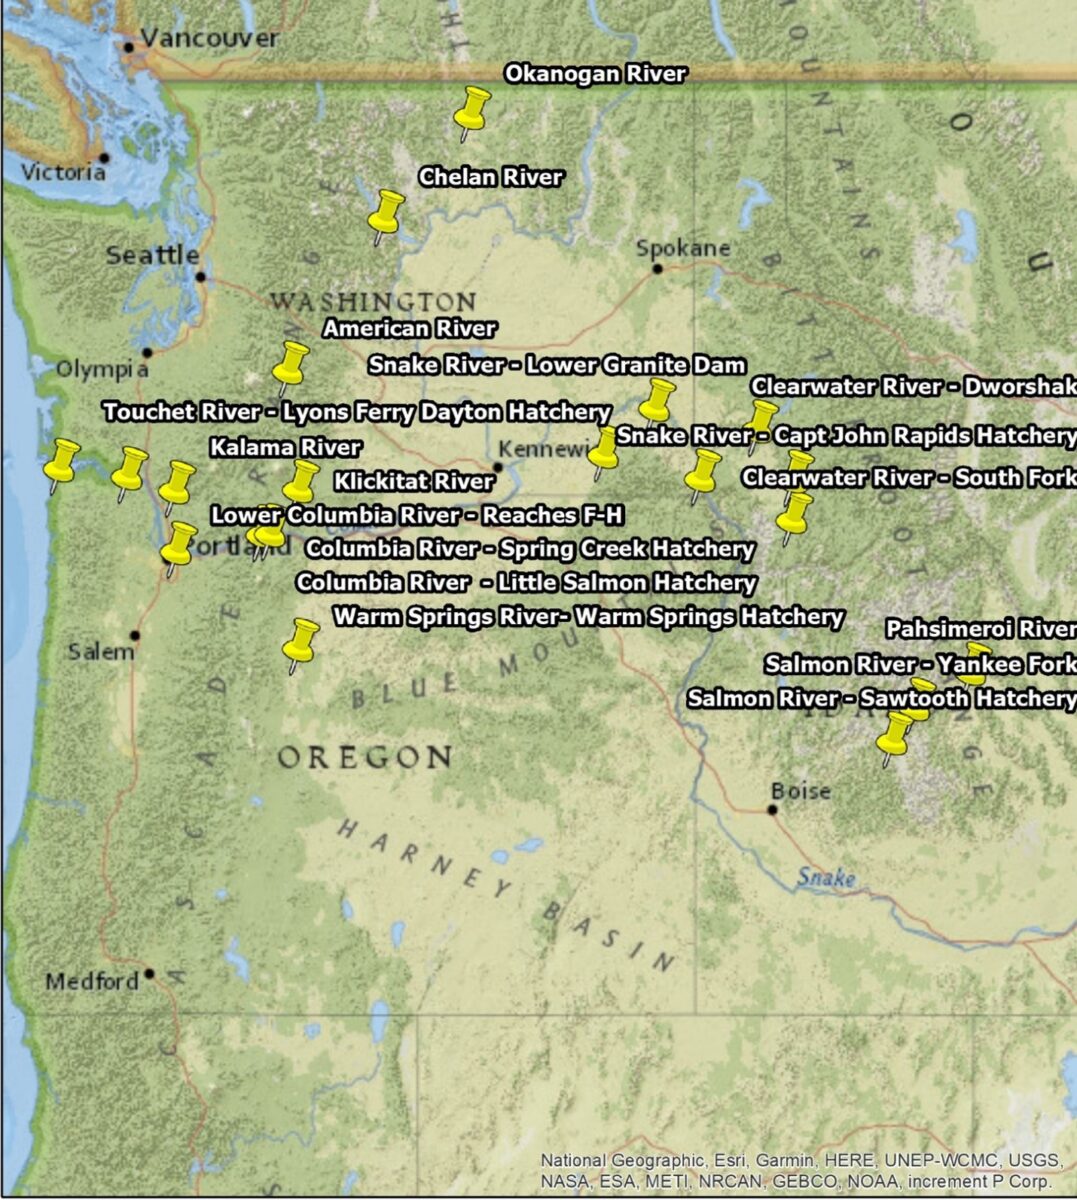 Points on a map of the Pacific Northwest showing different fisheries